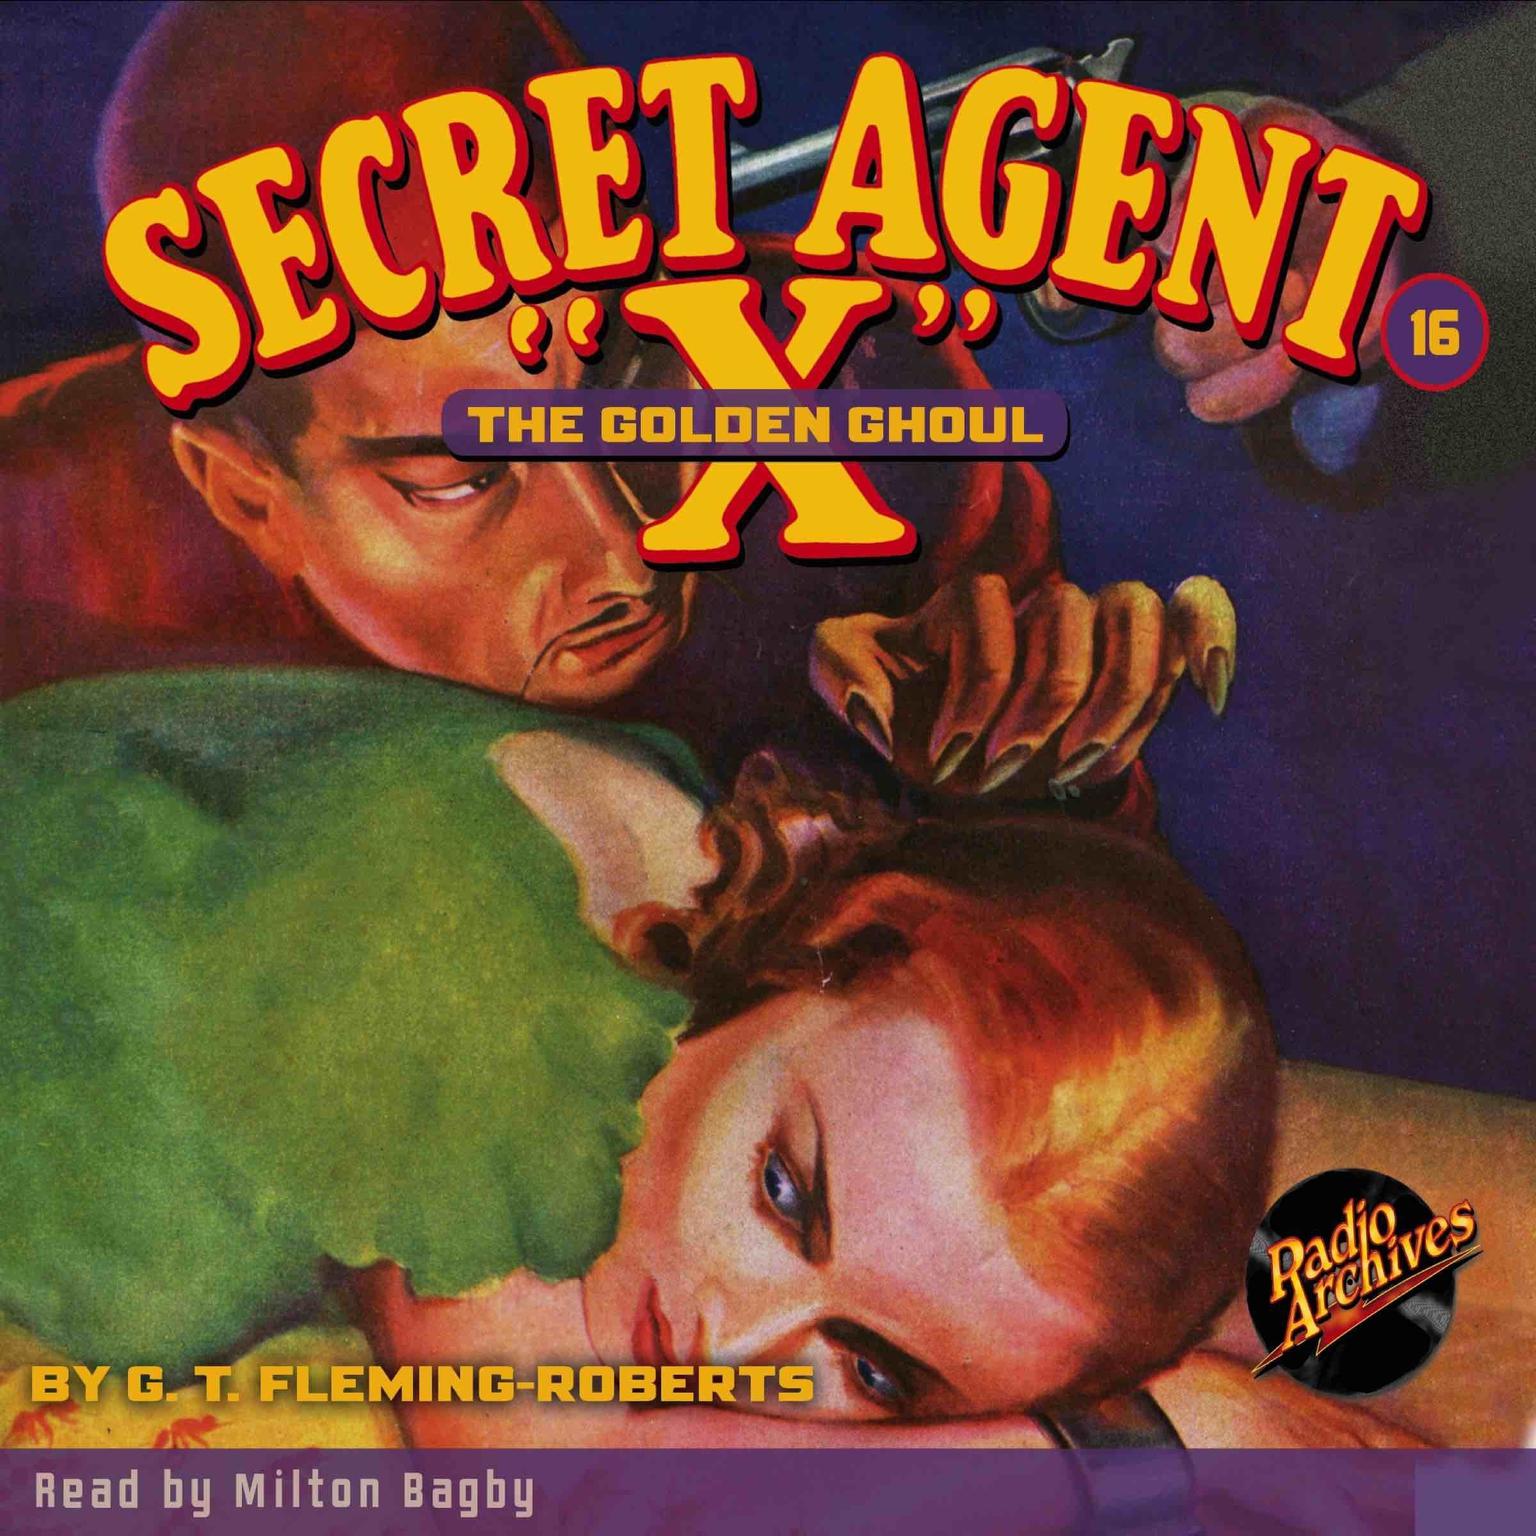 Secret Agent X: The Golden Ghoul Audiobook, by G. T. Fleming-Roberts